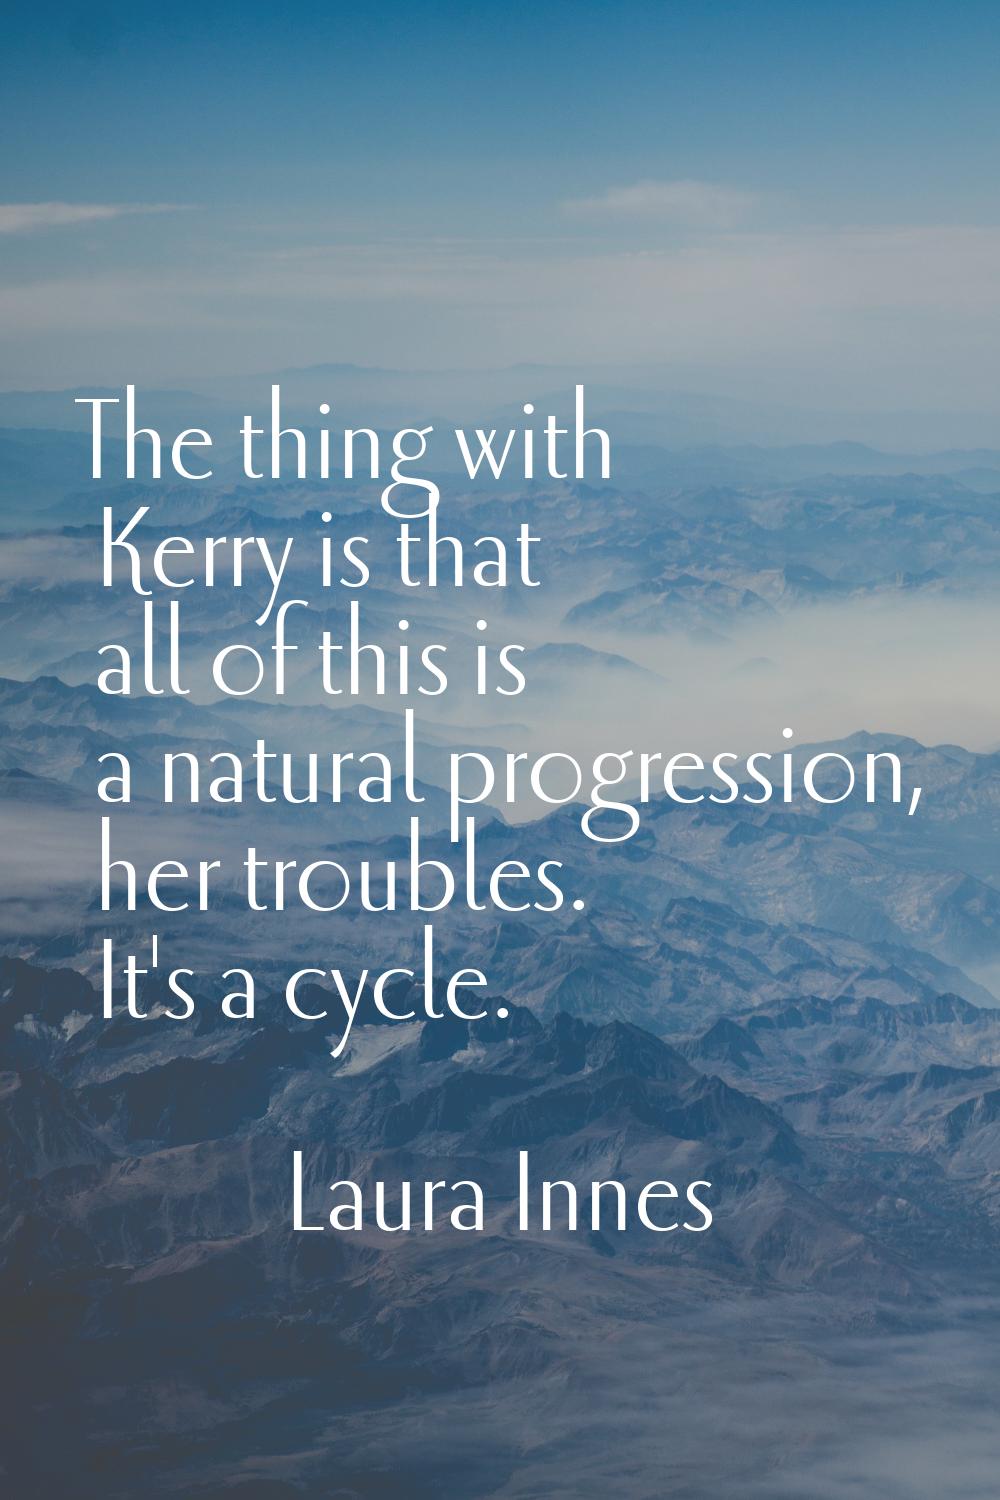 The thing with Kerry is that all of this is a natural progression, her troubles. It's a cycle.